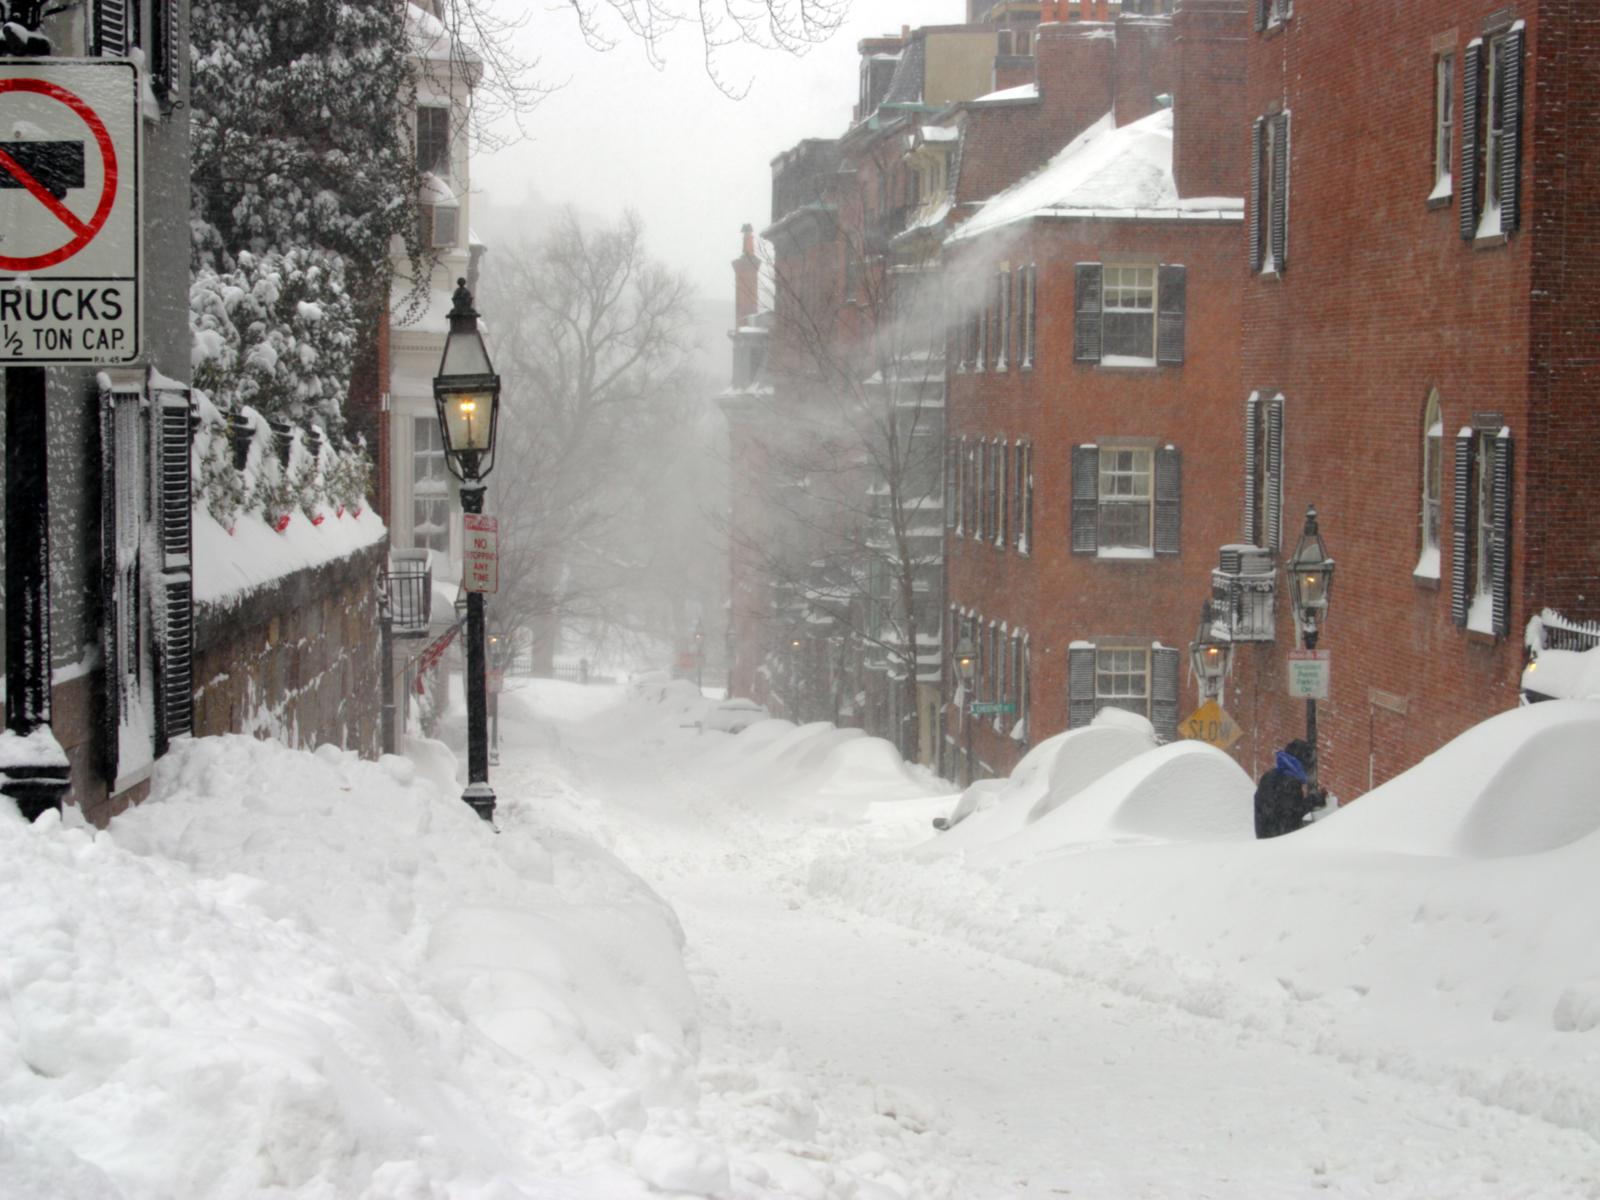 Snowstorm pictured during the worst time to visit Boston